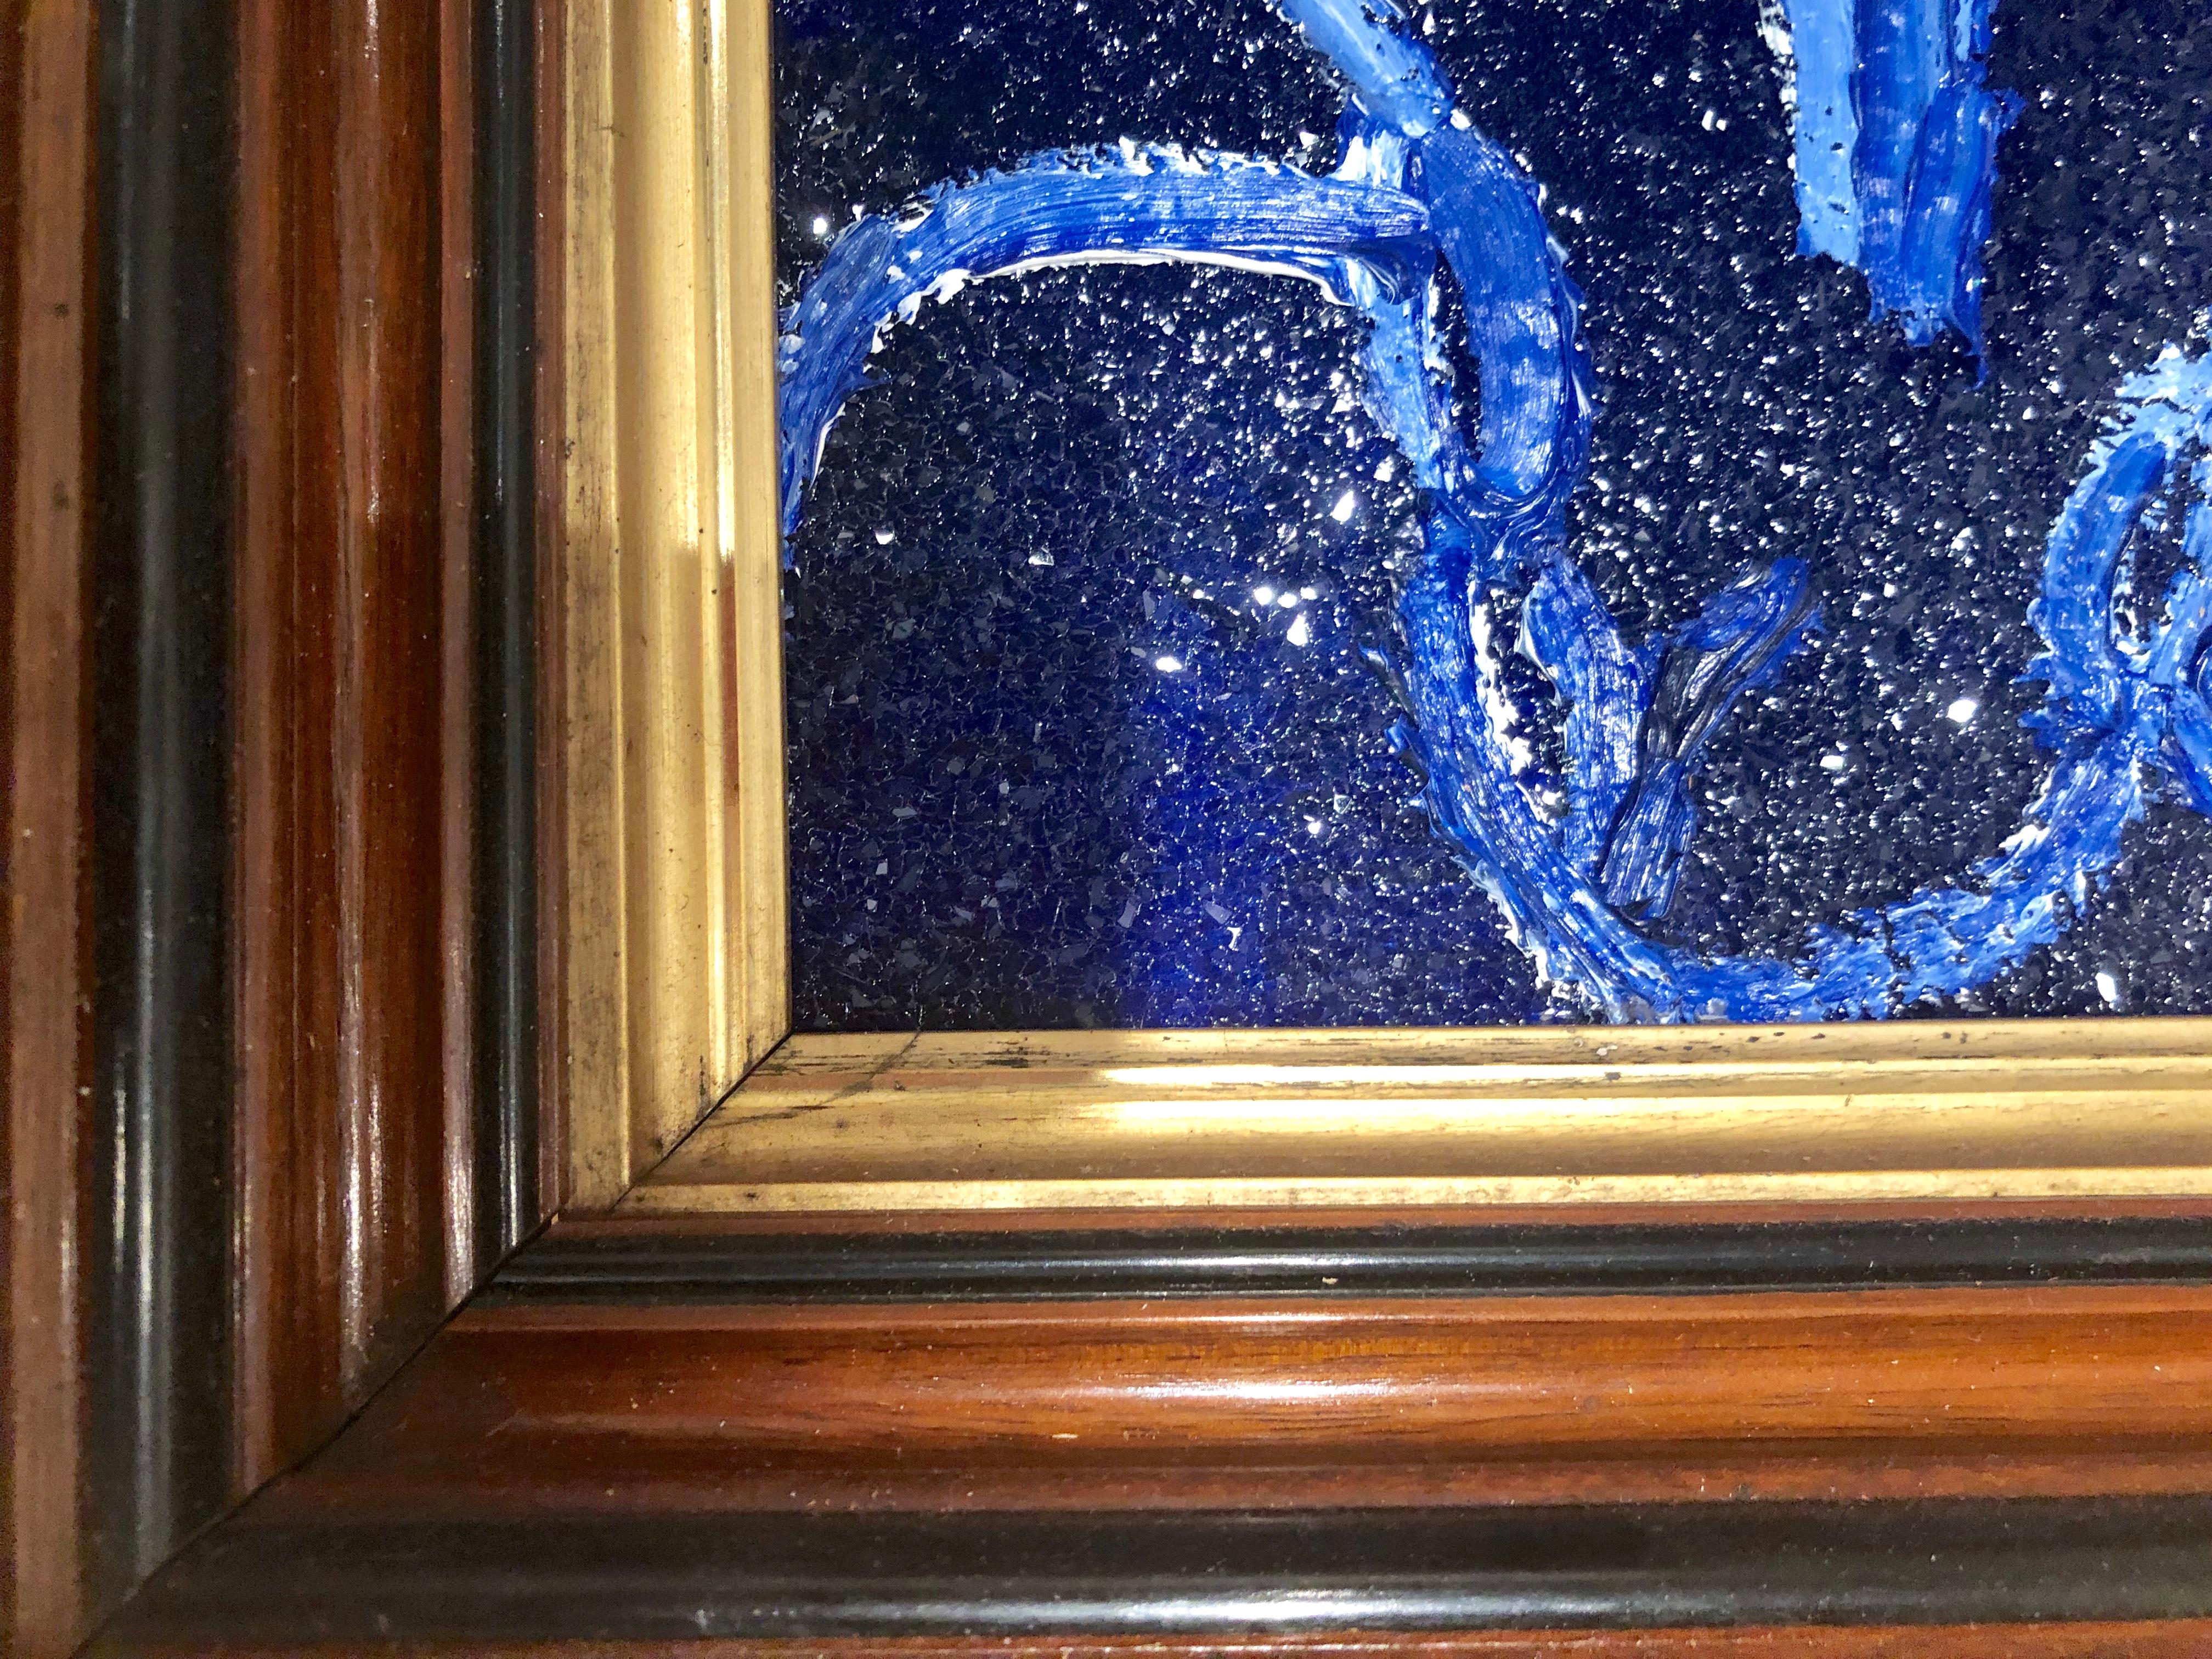 Diamond Dust Bunny Cobalt Blue, Antique Wood Frame - Neo-Expressionist Painting by Hunt Slonem